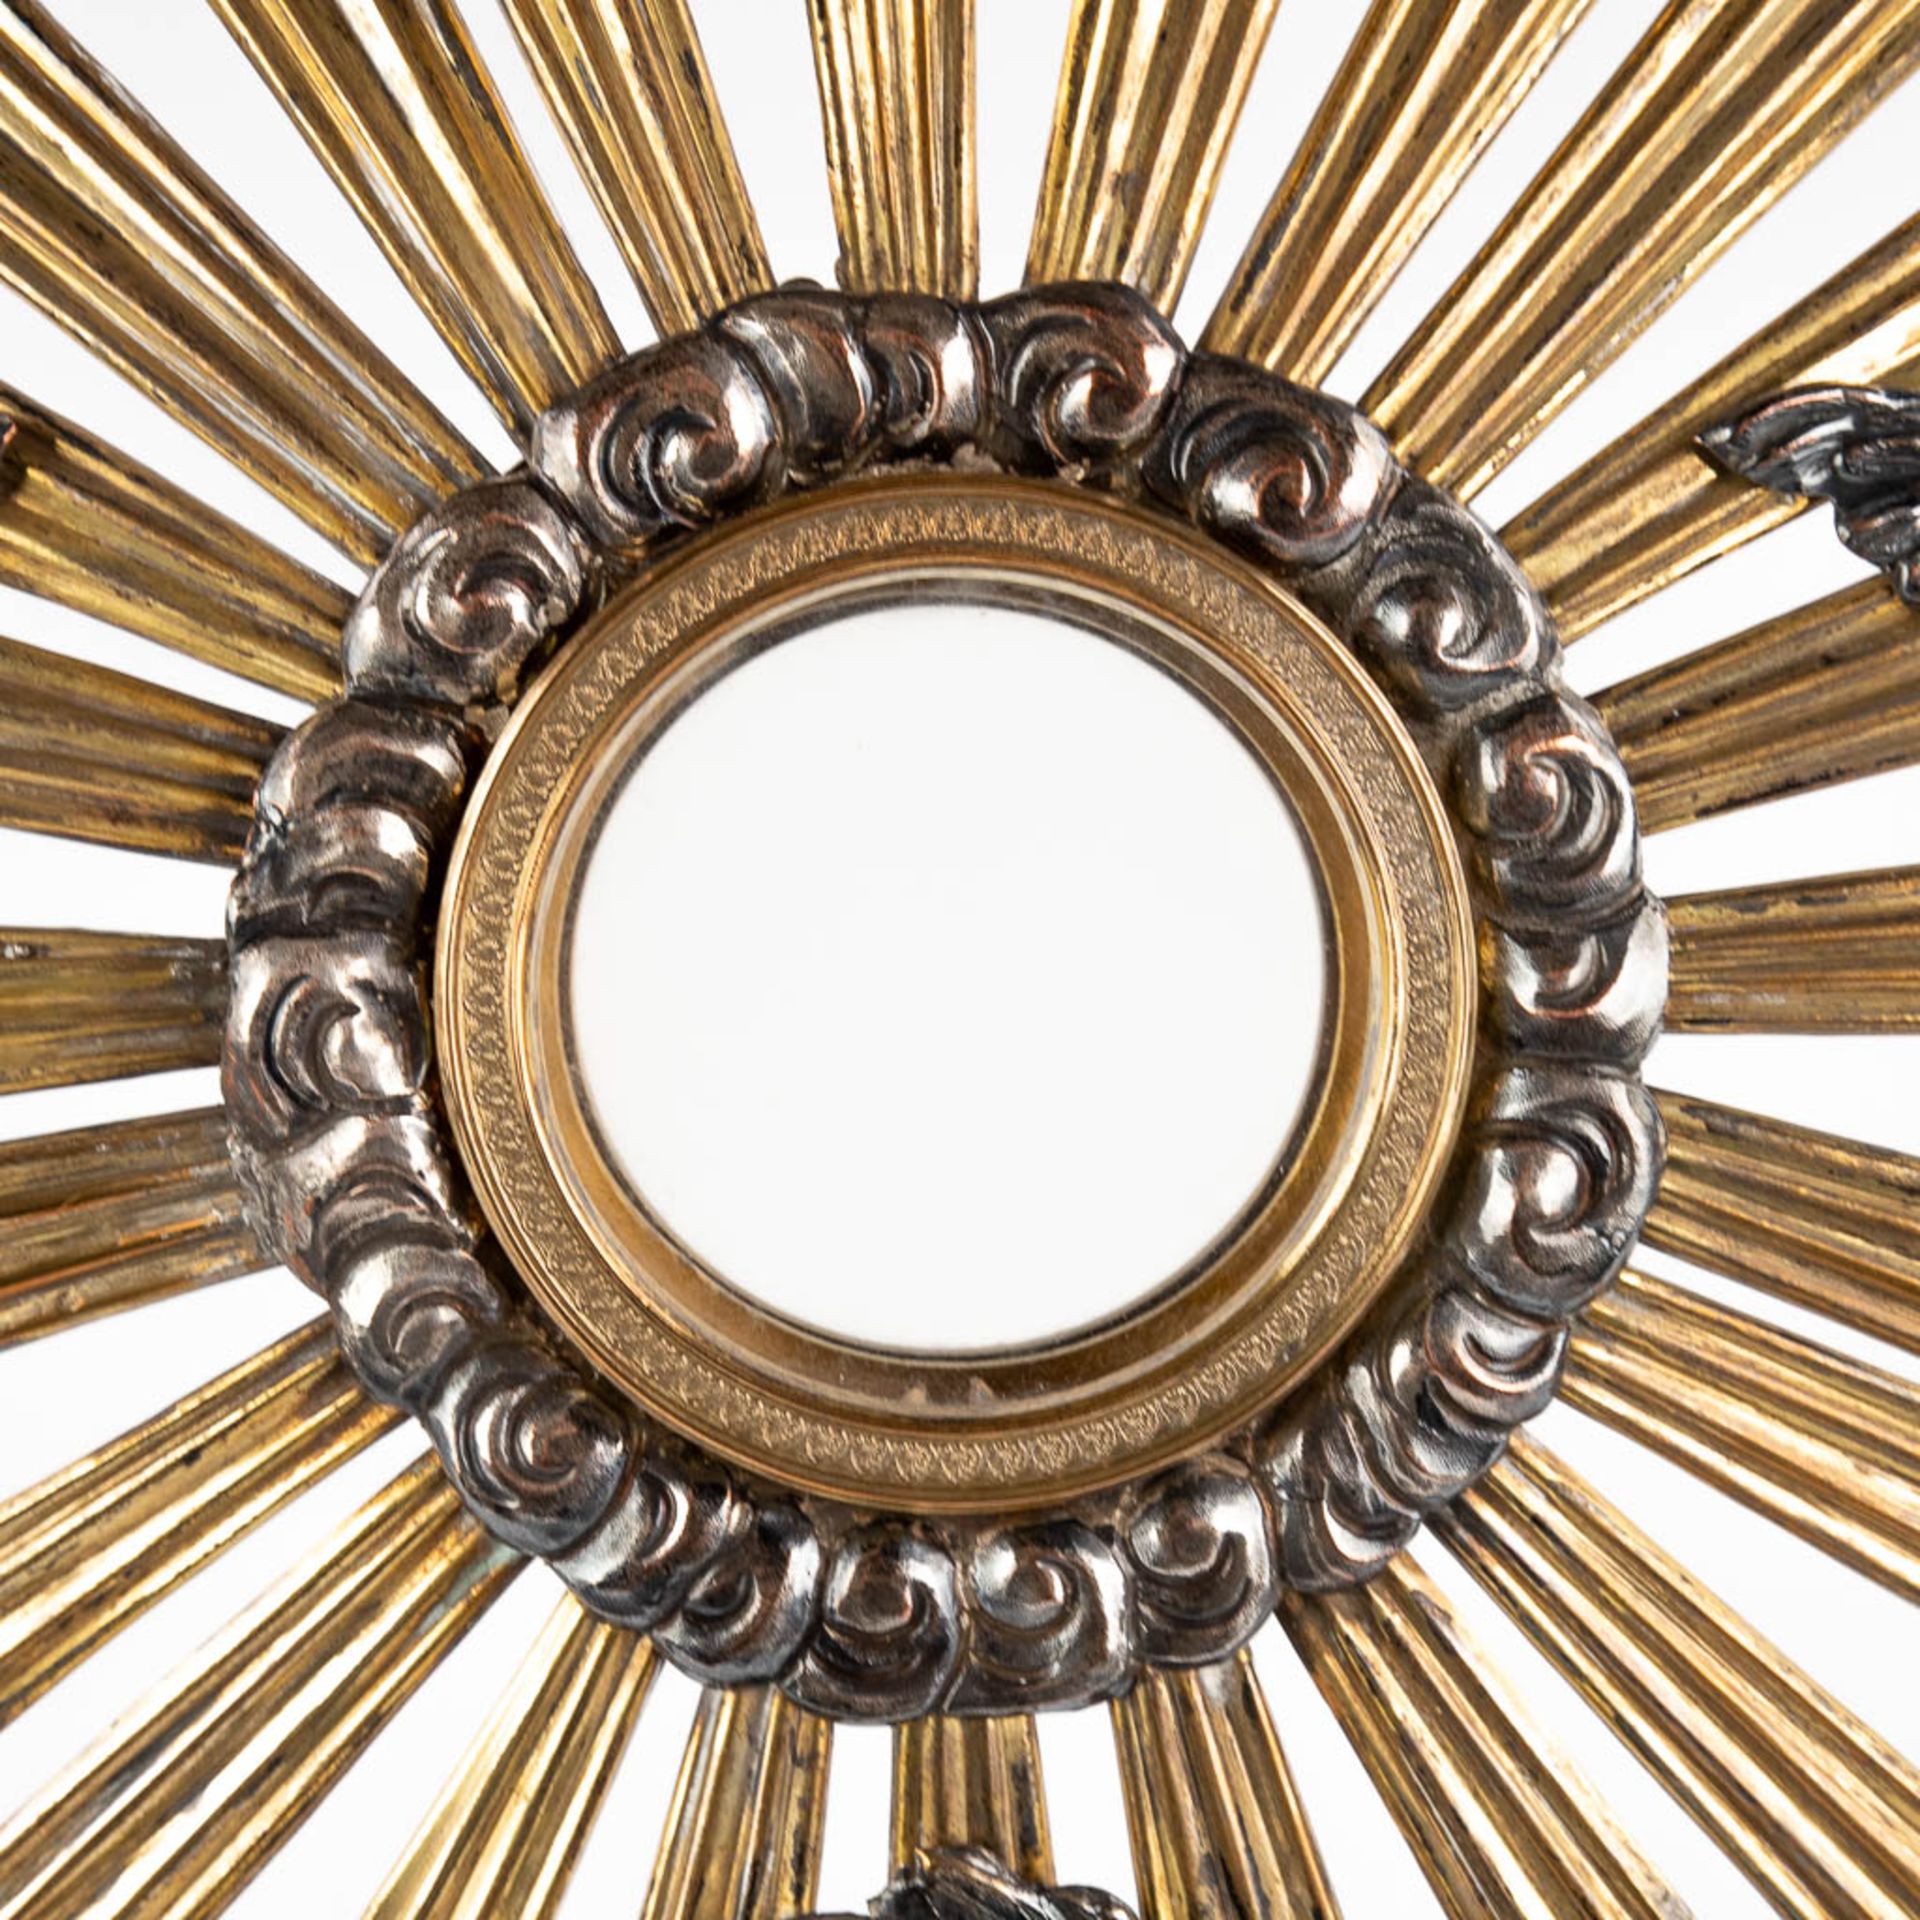 A sunburst monstrance, silver-plated metal and brass. Circa 1900. (D:15 x W:29 x H:57 cm) - Image 11 of 14